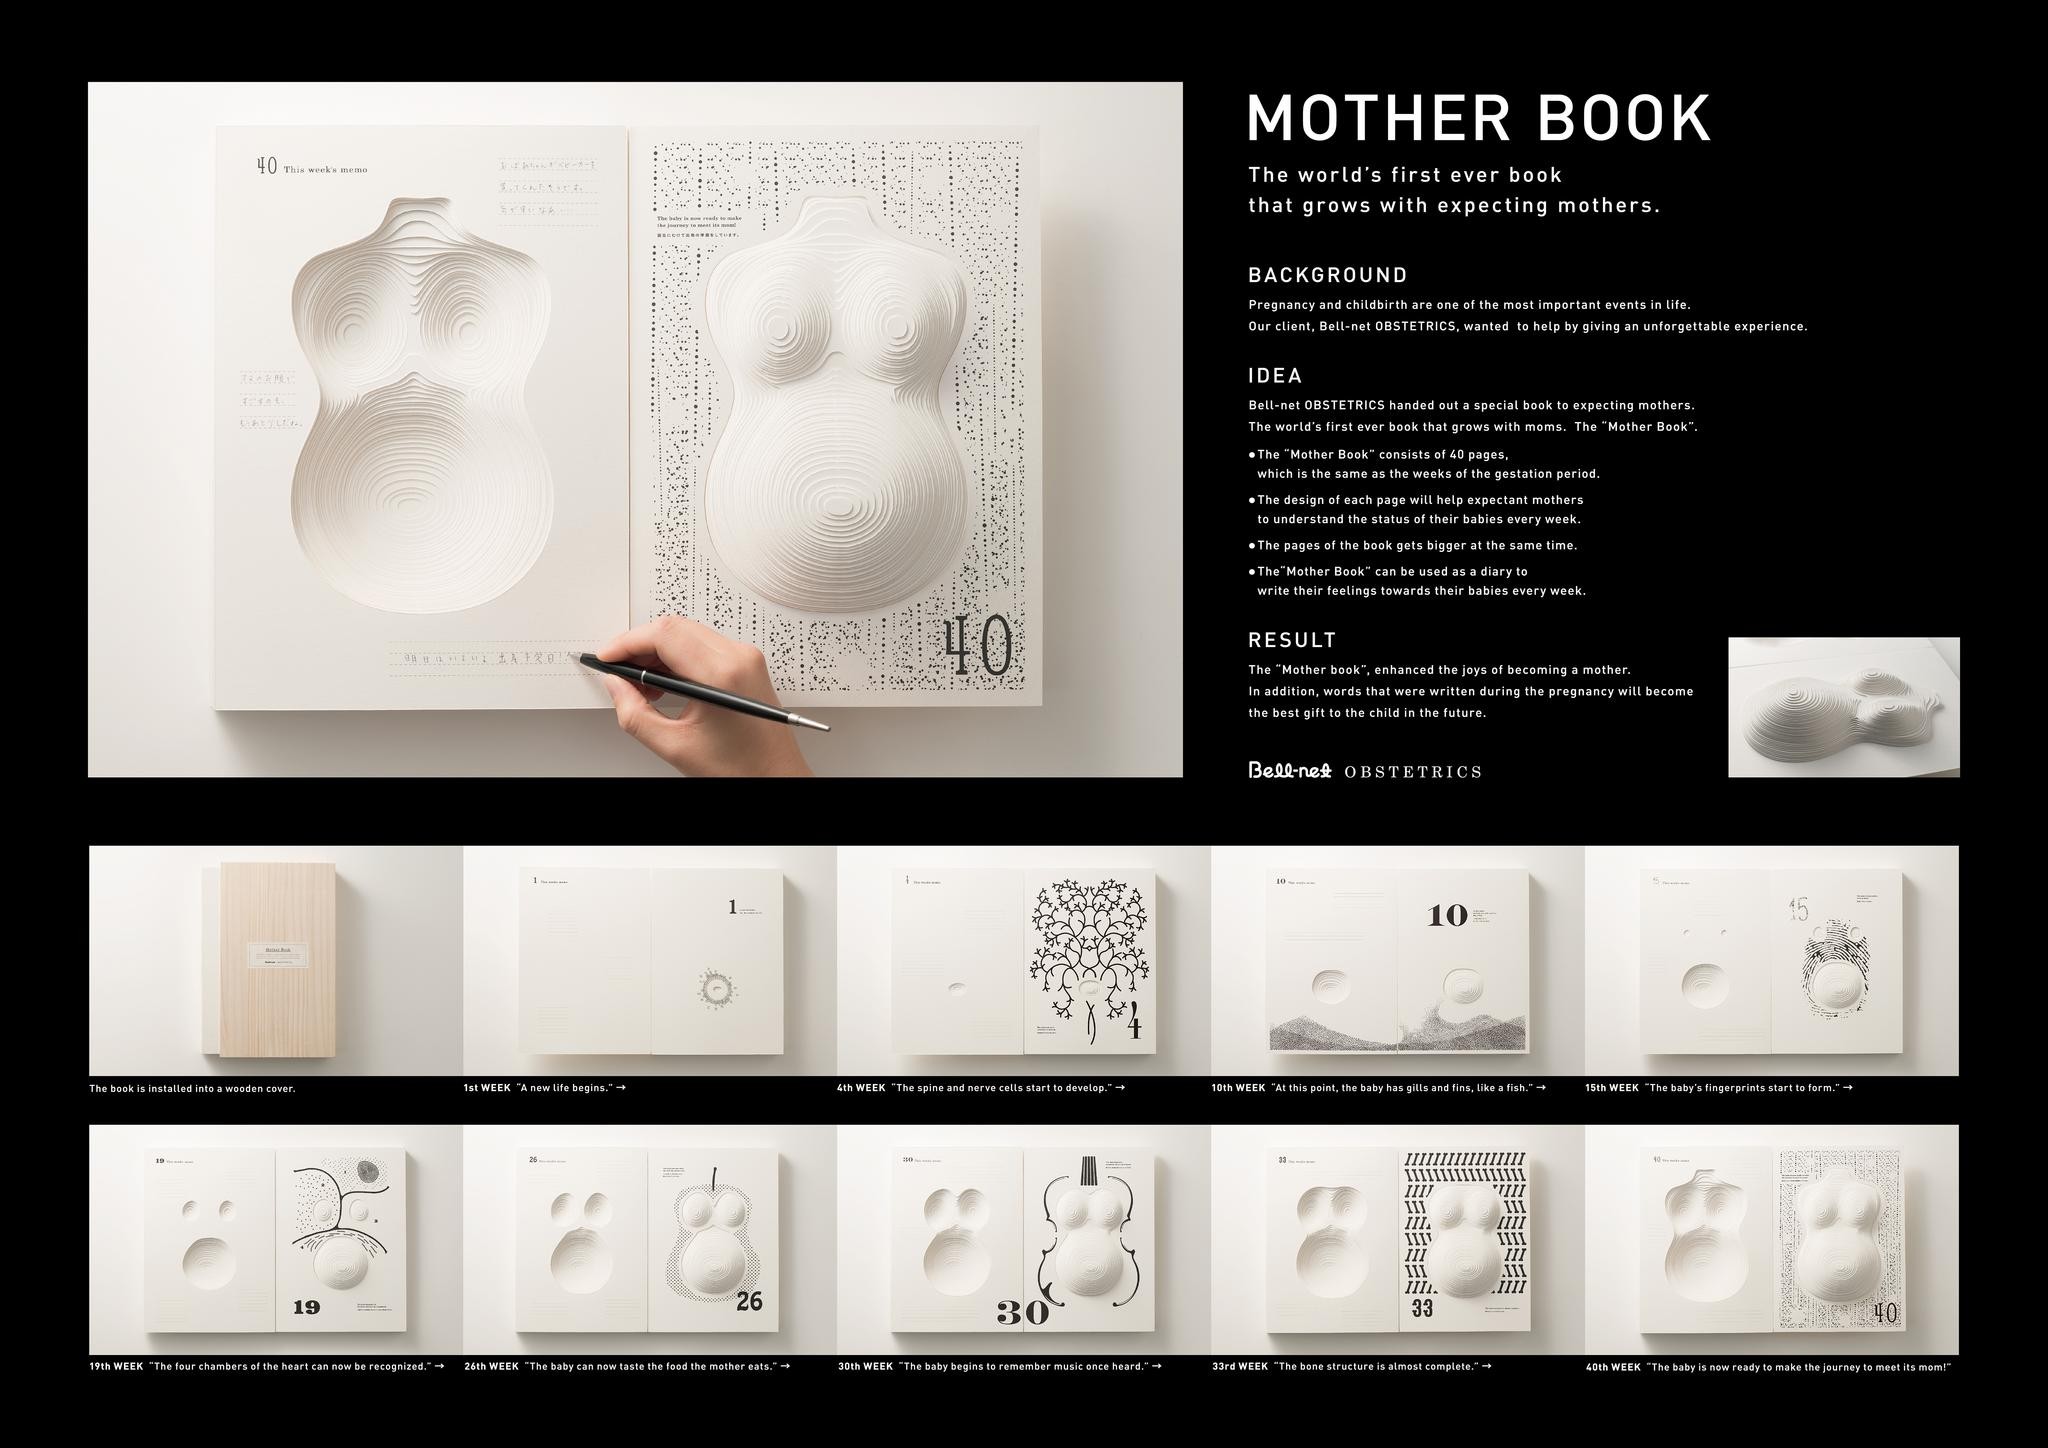 MOTHER BOOK